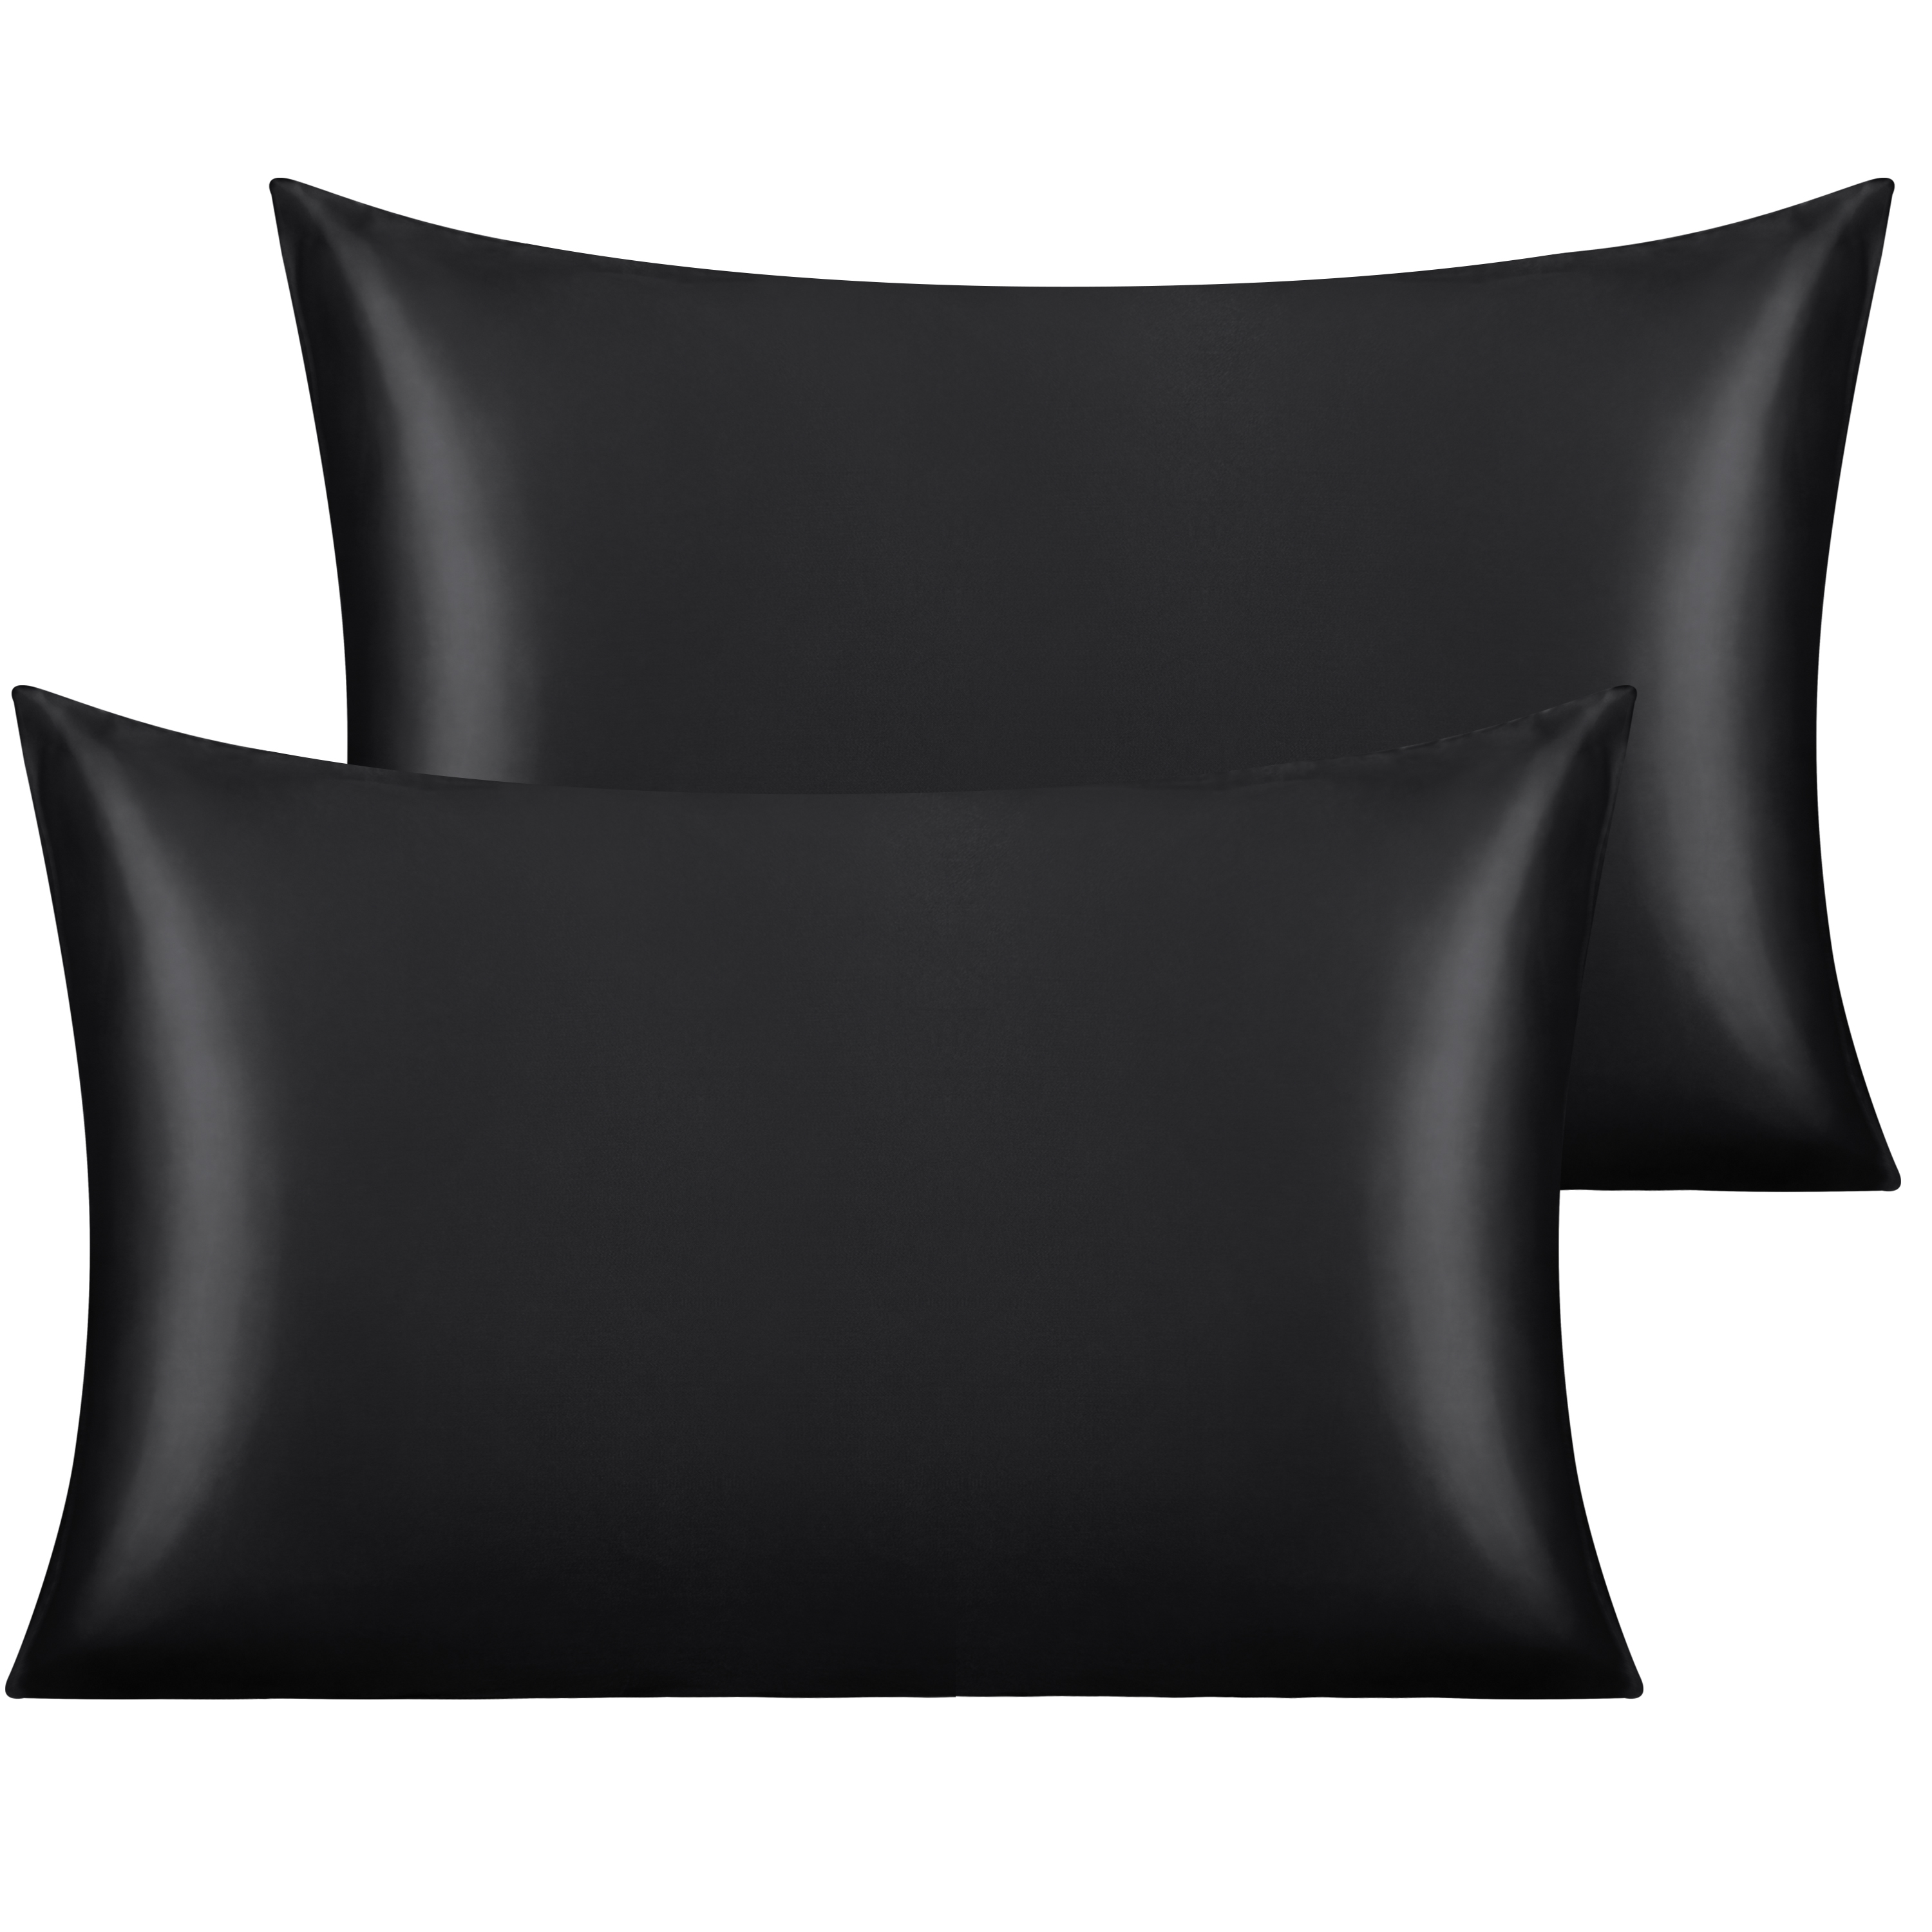 NTBAY 2 Pack Satin Toddler Pillowcases with Envelope Closure, 14 x 20 Inches